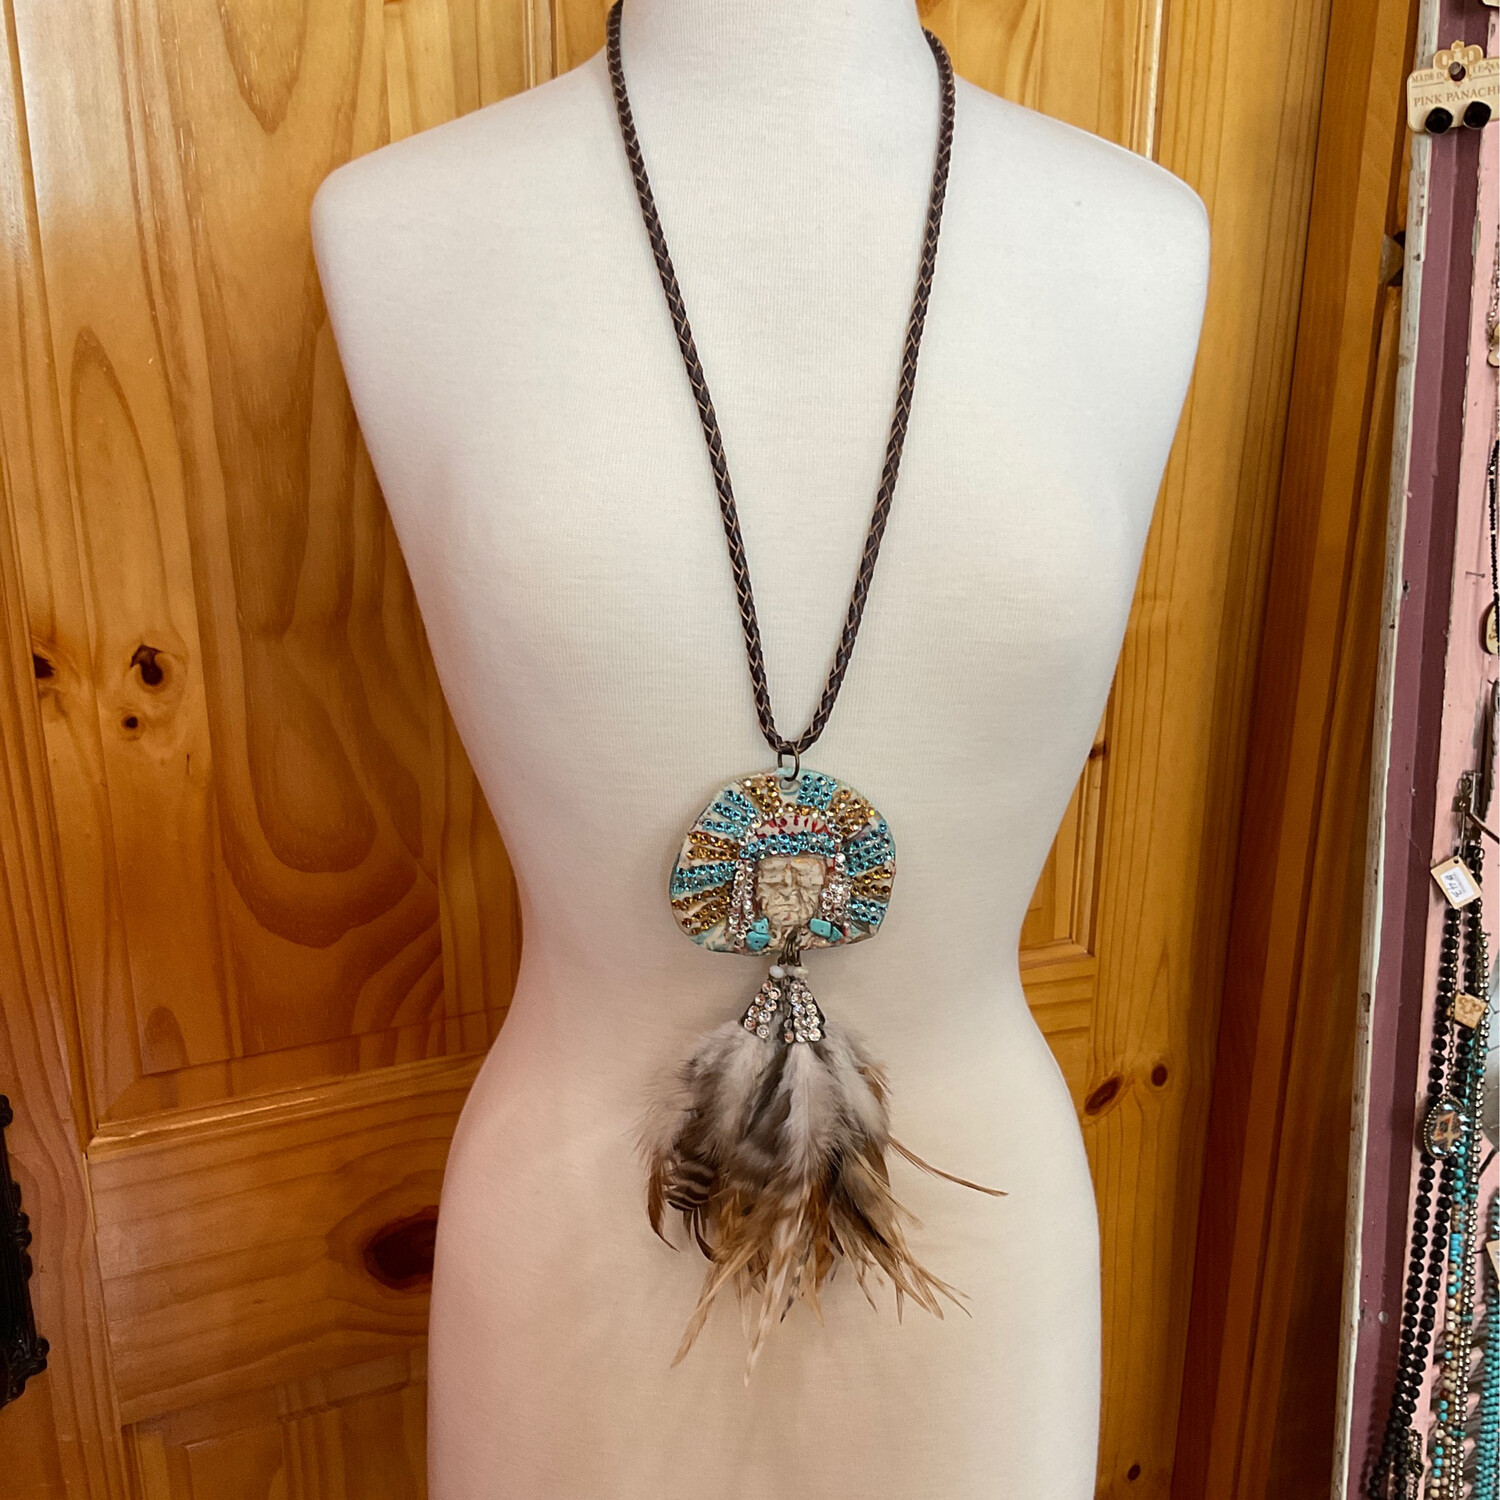 A Rare Bird Necklace Indian Head Stone W/Feathers 